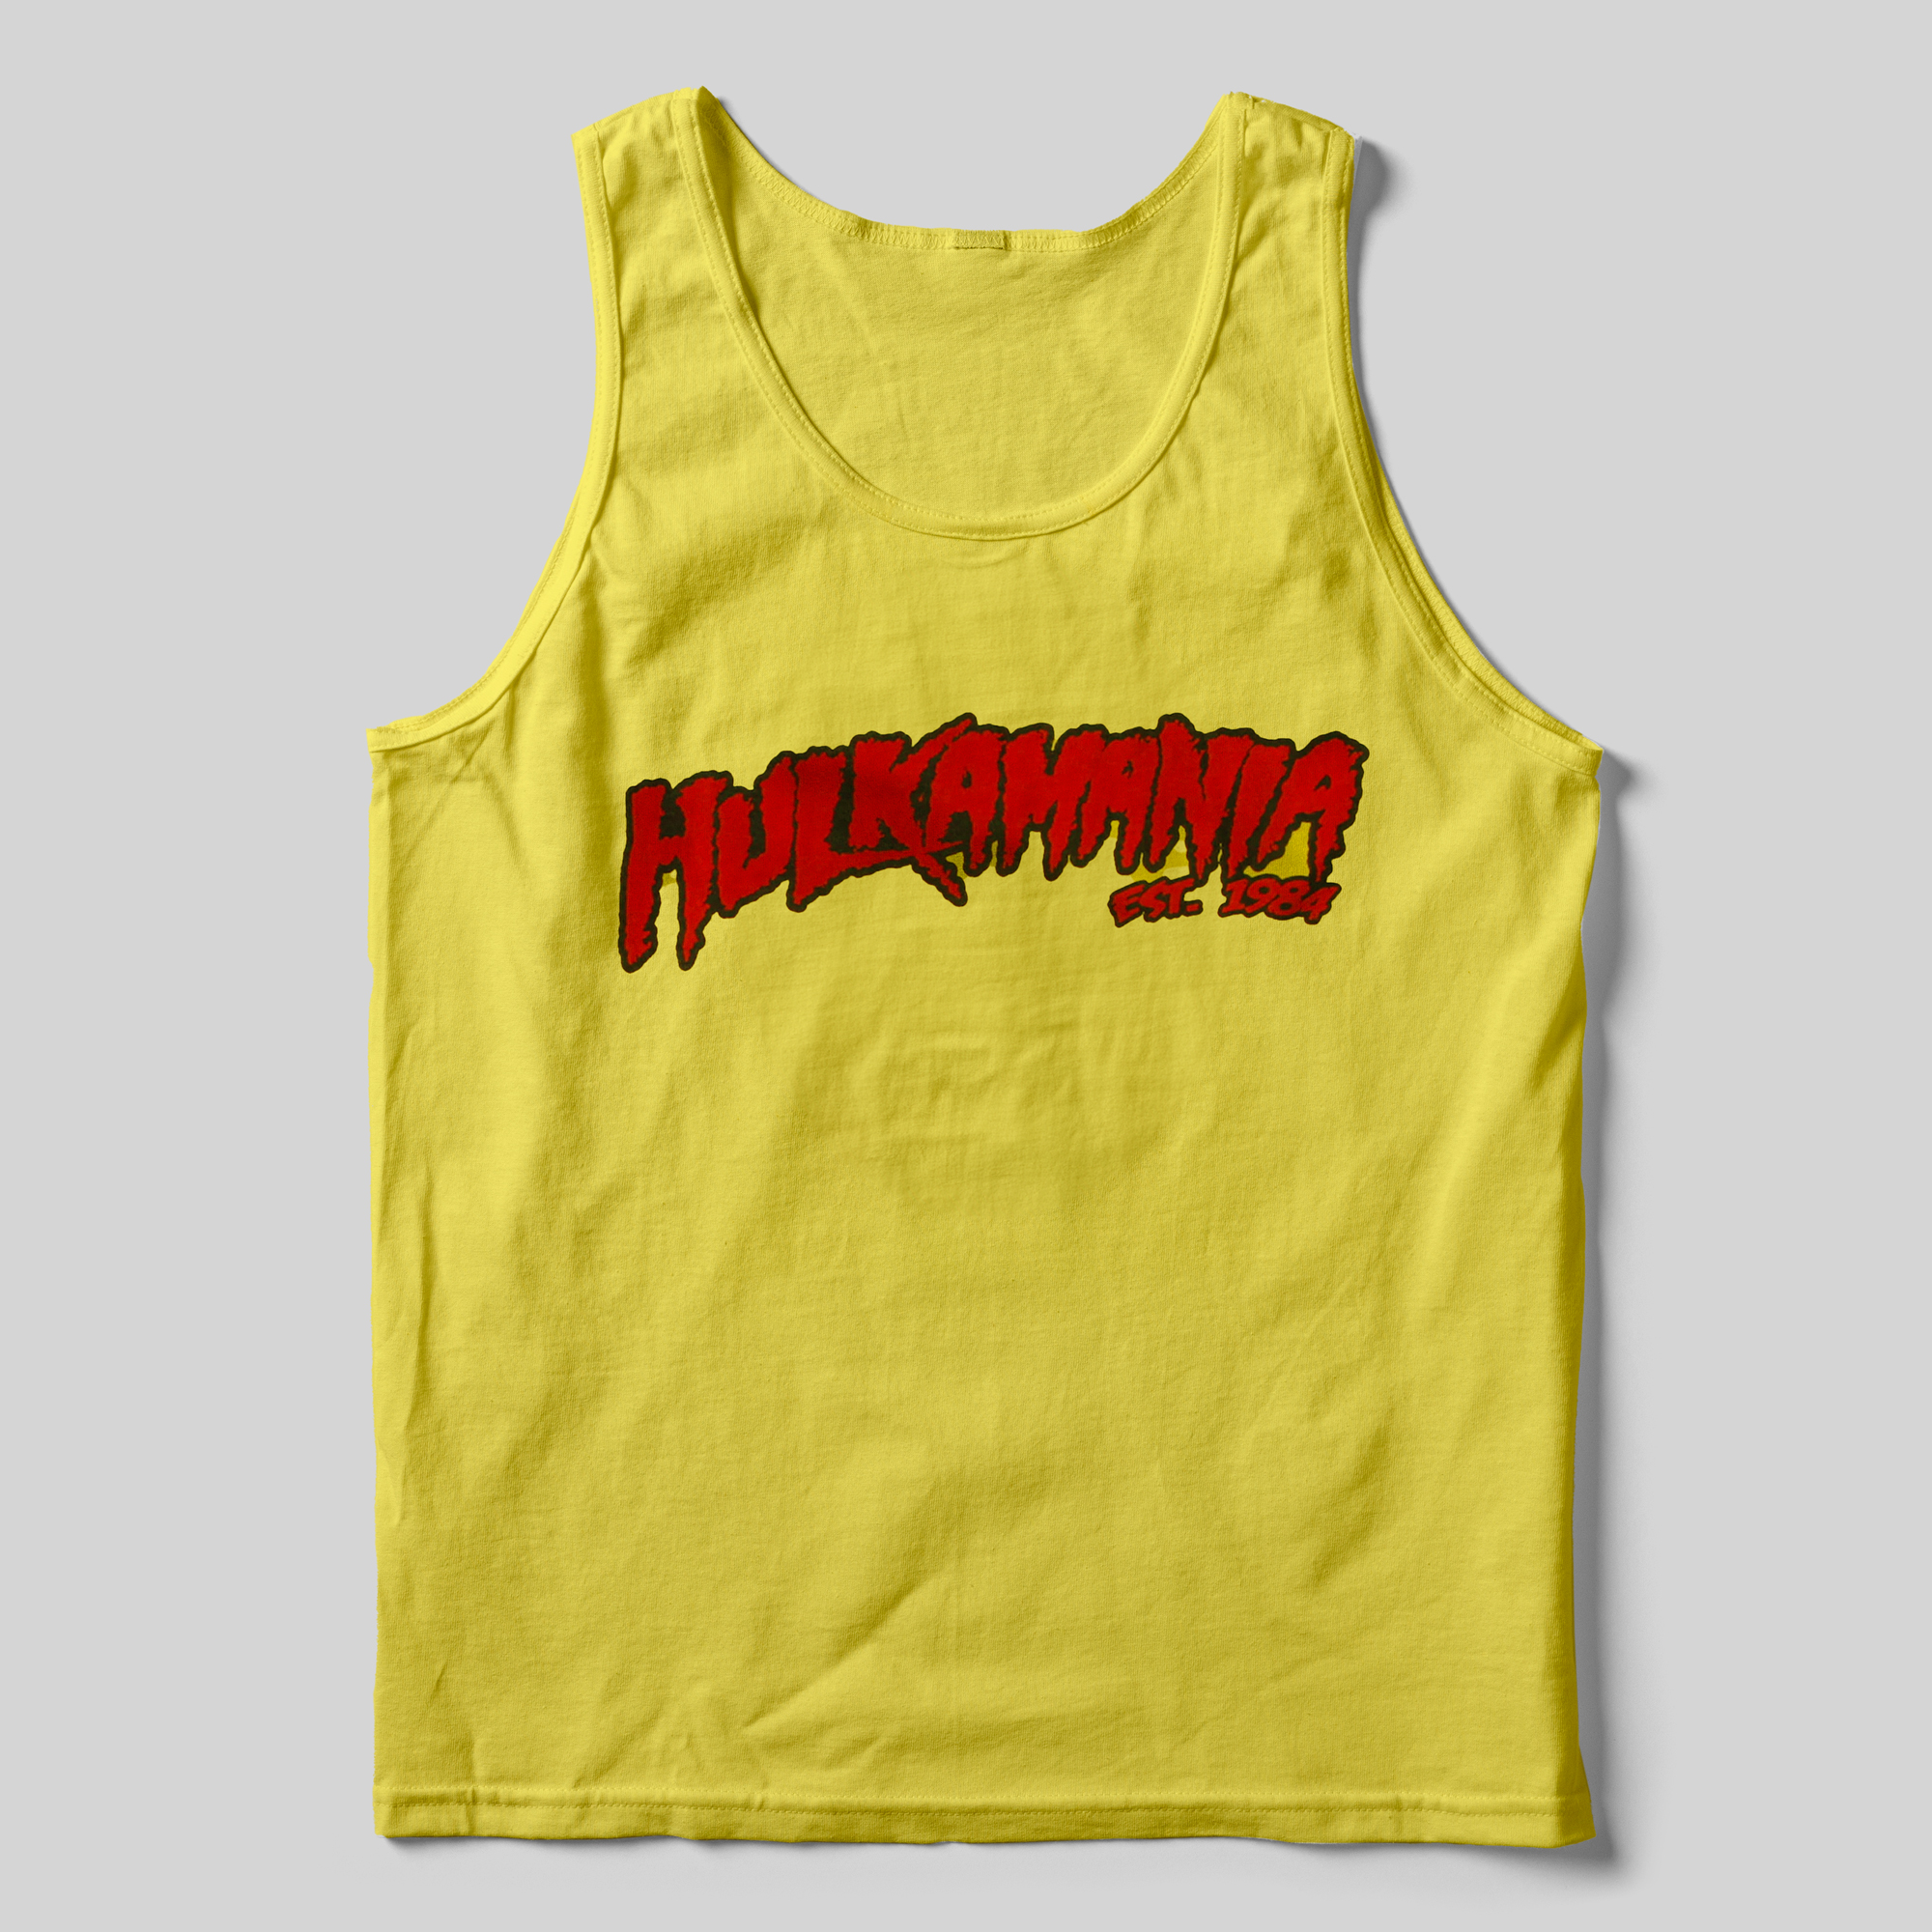 Hulk Hogan's bright yellow tank with "Hulkamania" across the front is still one of the most popular in the sport. 